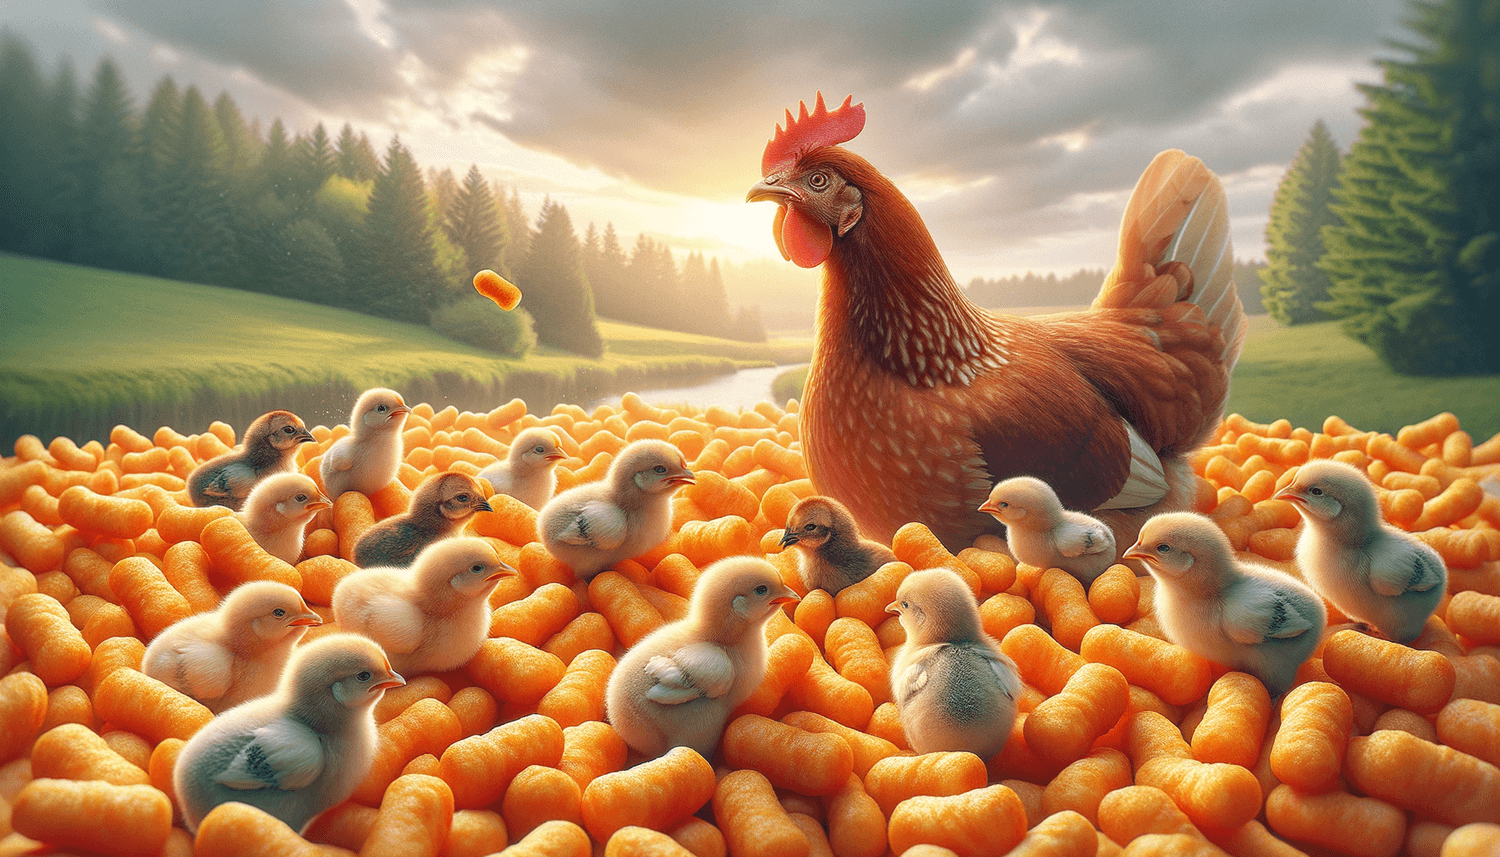 Can Chickens Eat Cheese Puffs?